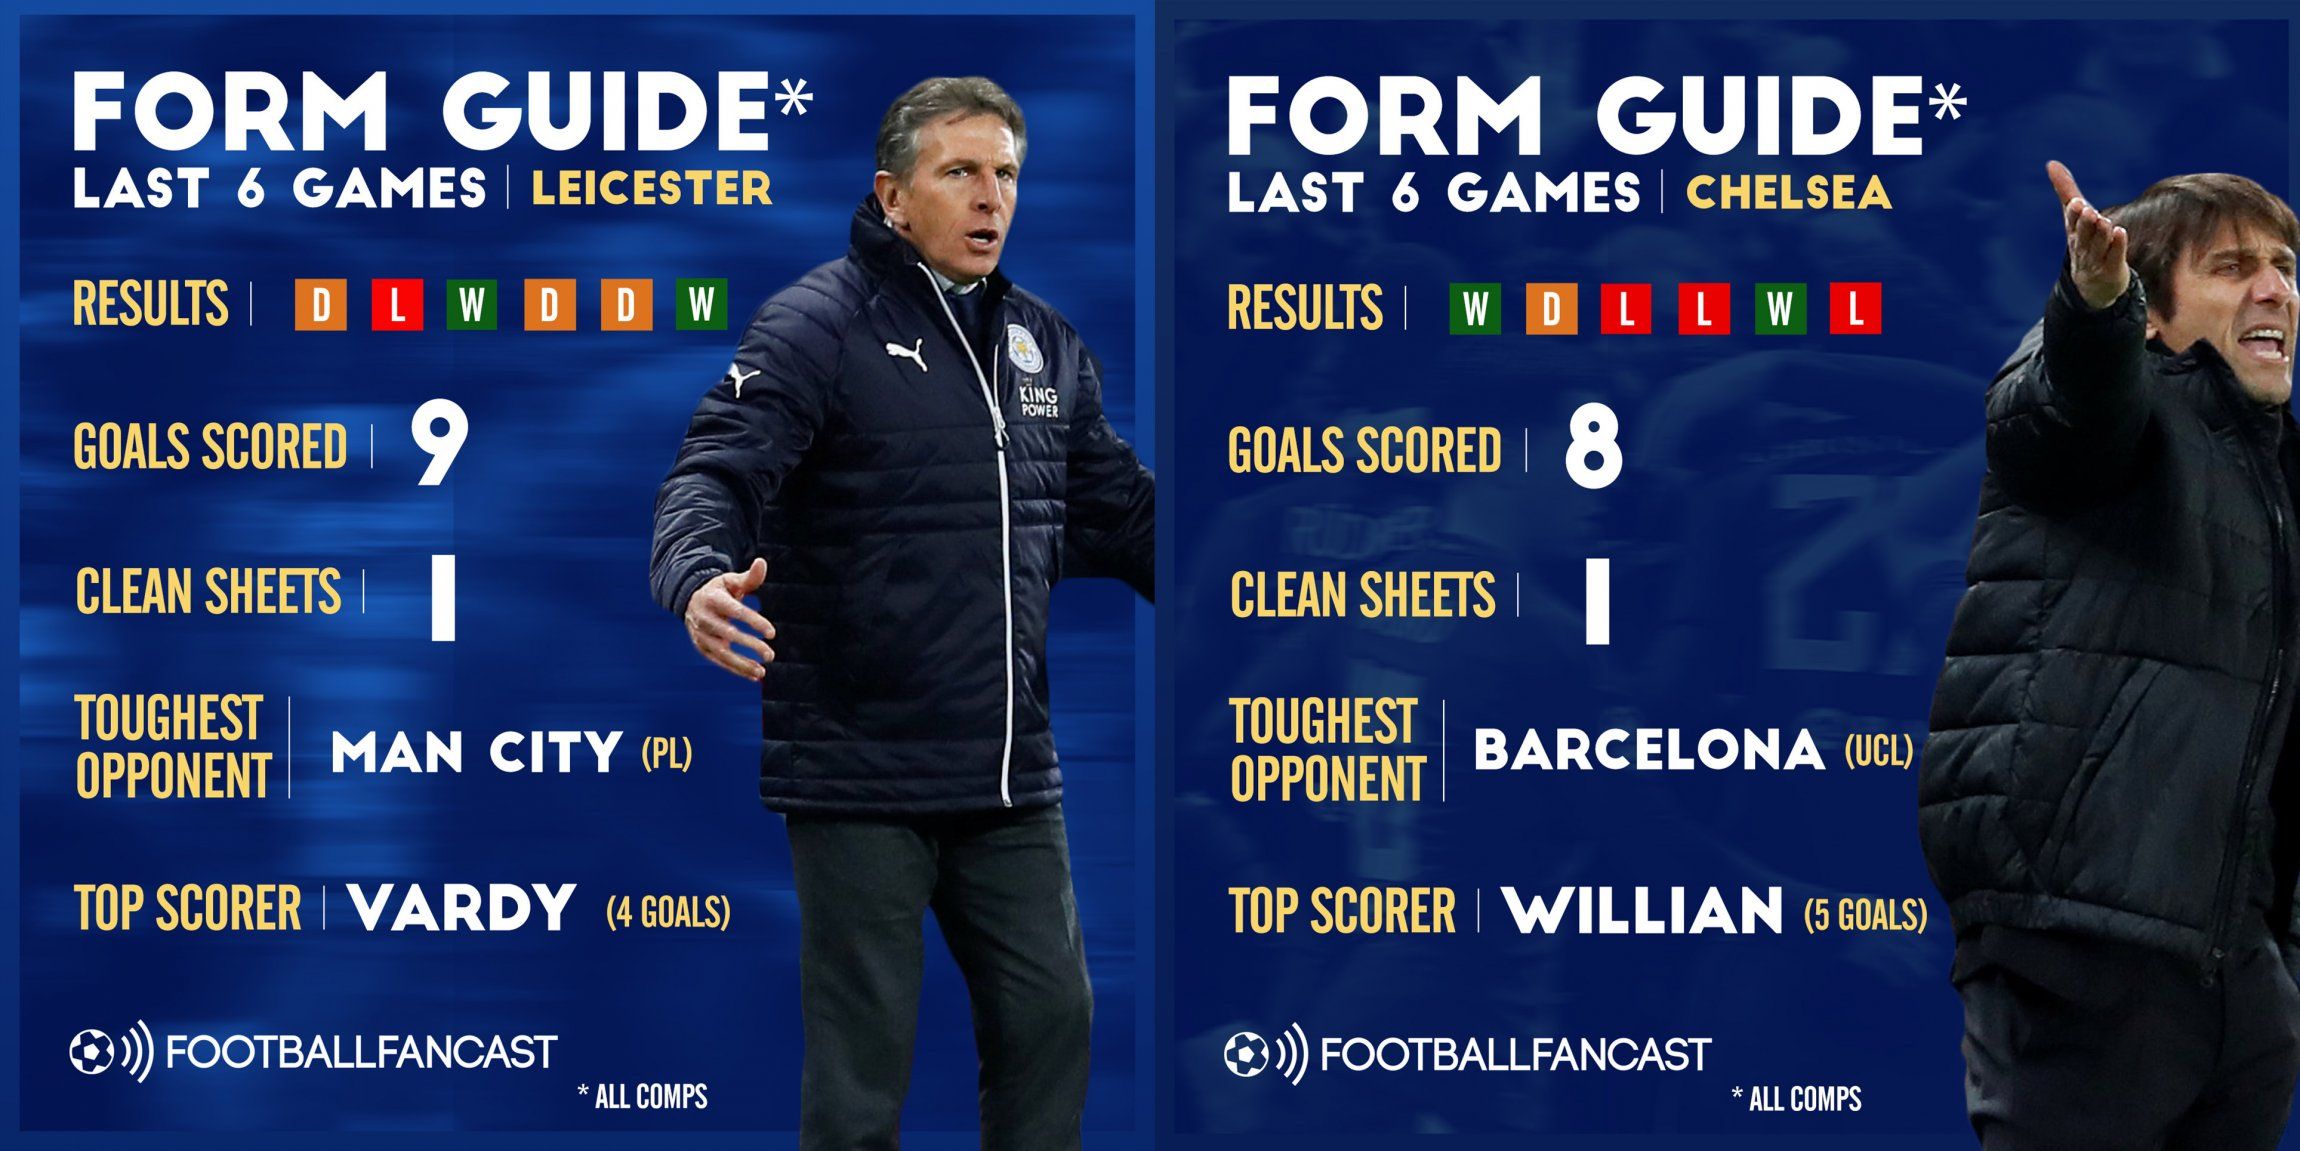 Leicester City vs Chelsea - Form Guide